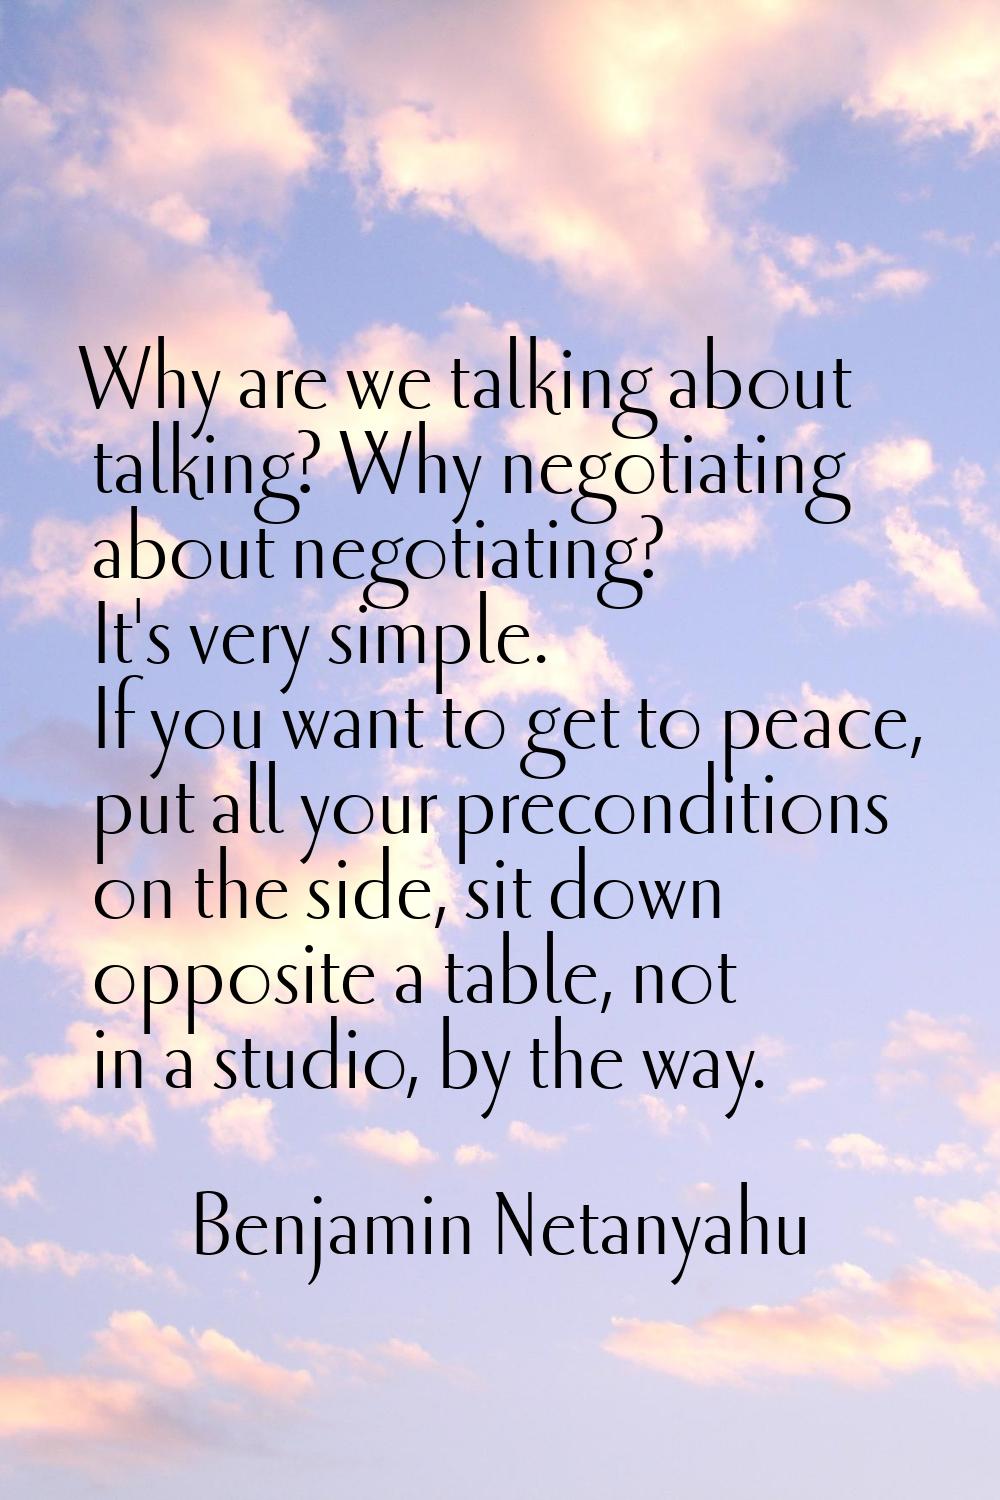 Why are we talking about talking? Why negotiating about negotiating? It's very simple. If you want 